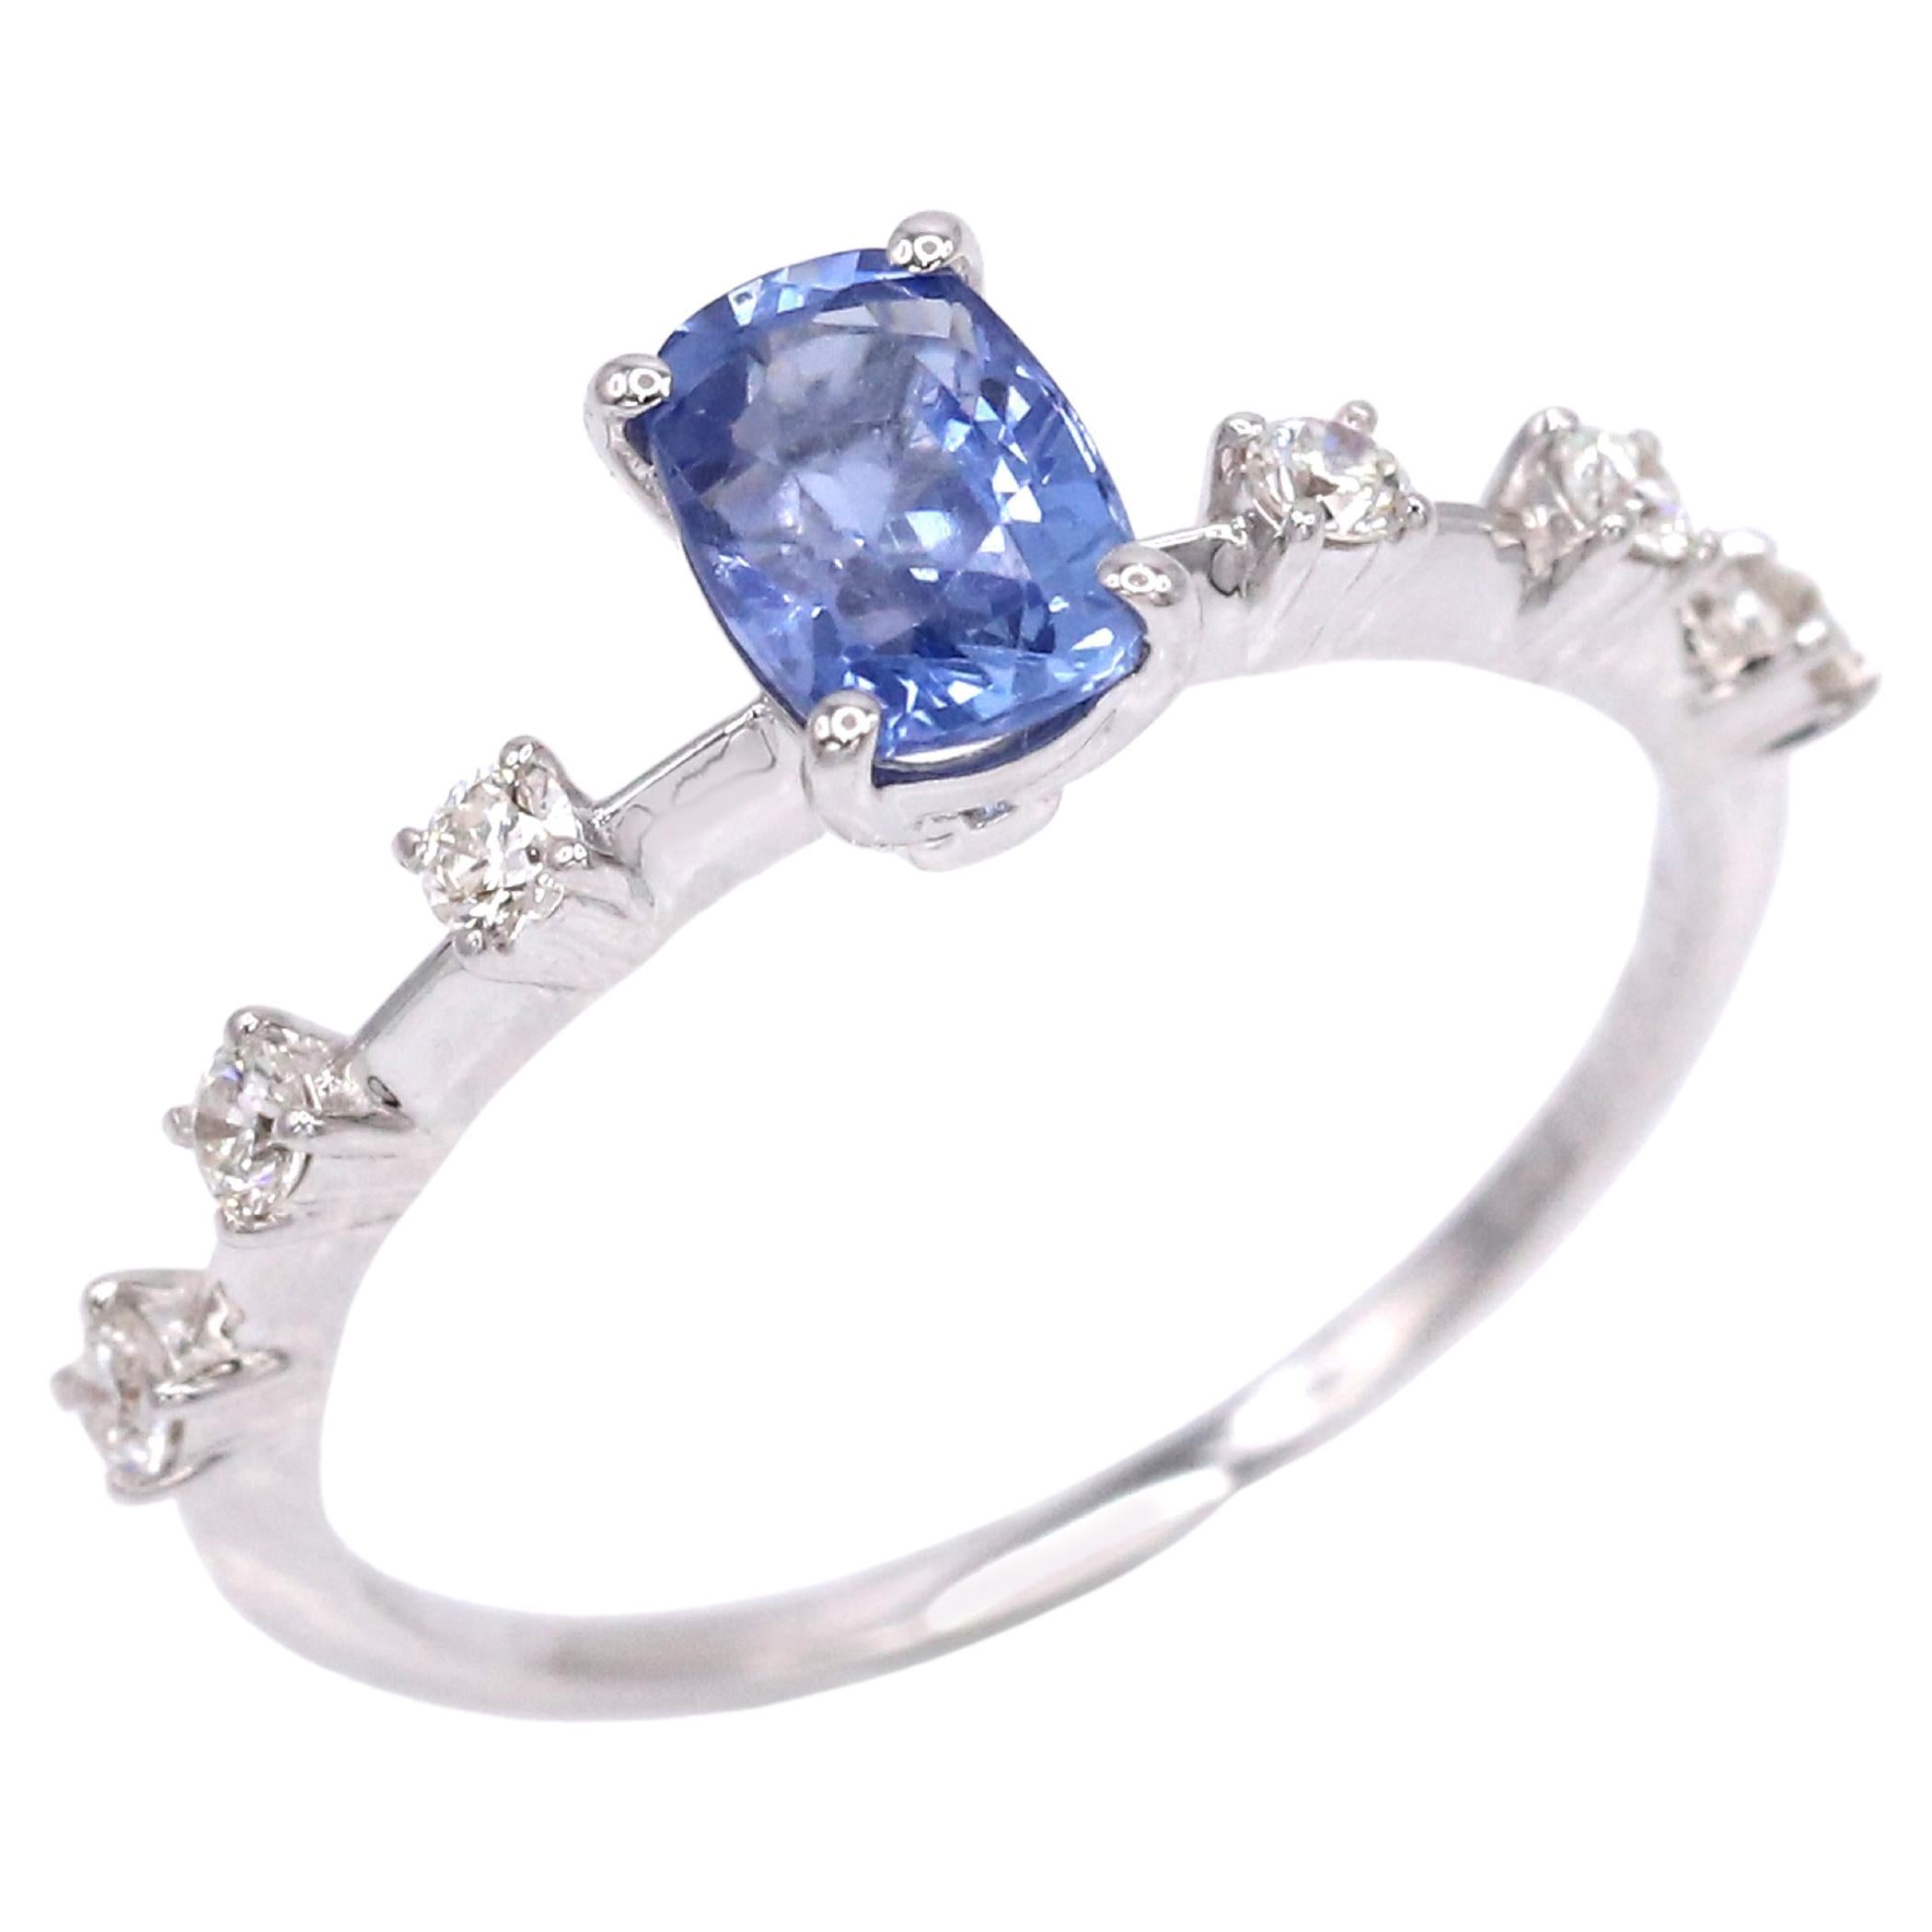 For Sale:  0.95 Carat Blue Sapphire Diamond 18K White Gold Cocktail Engagement Ring